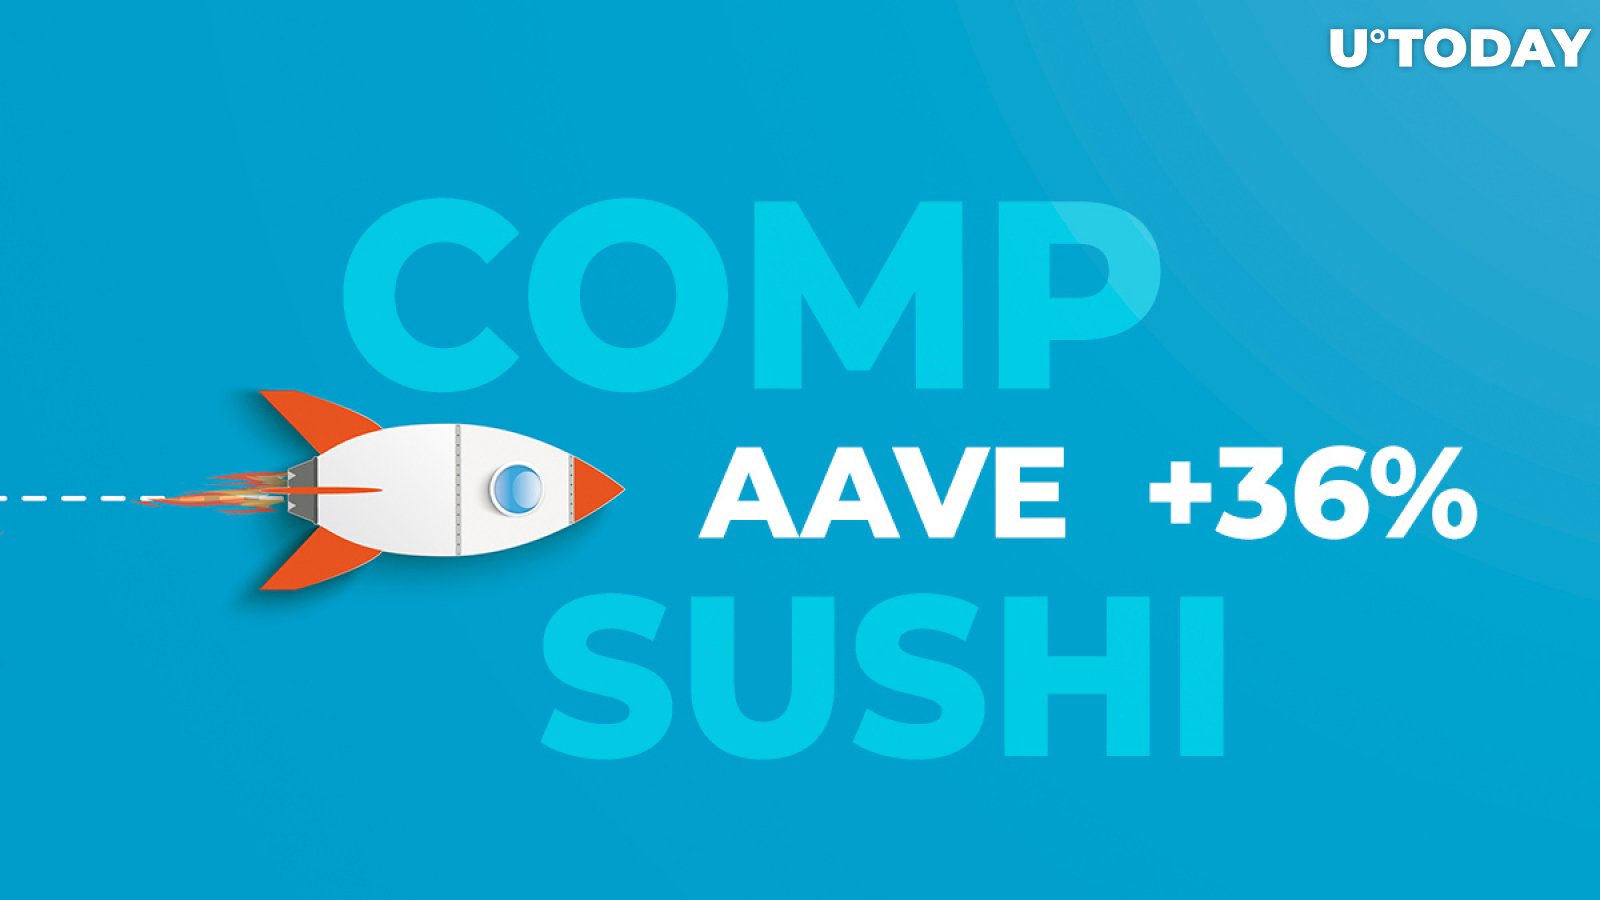 Aave Protocol (AAVE) Adds 36% in 24 Hours, Compound (COMP) and SushiSwap (SUSHI) Follow: Studiying the Reasons for the Pump